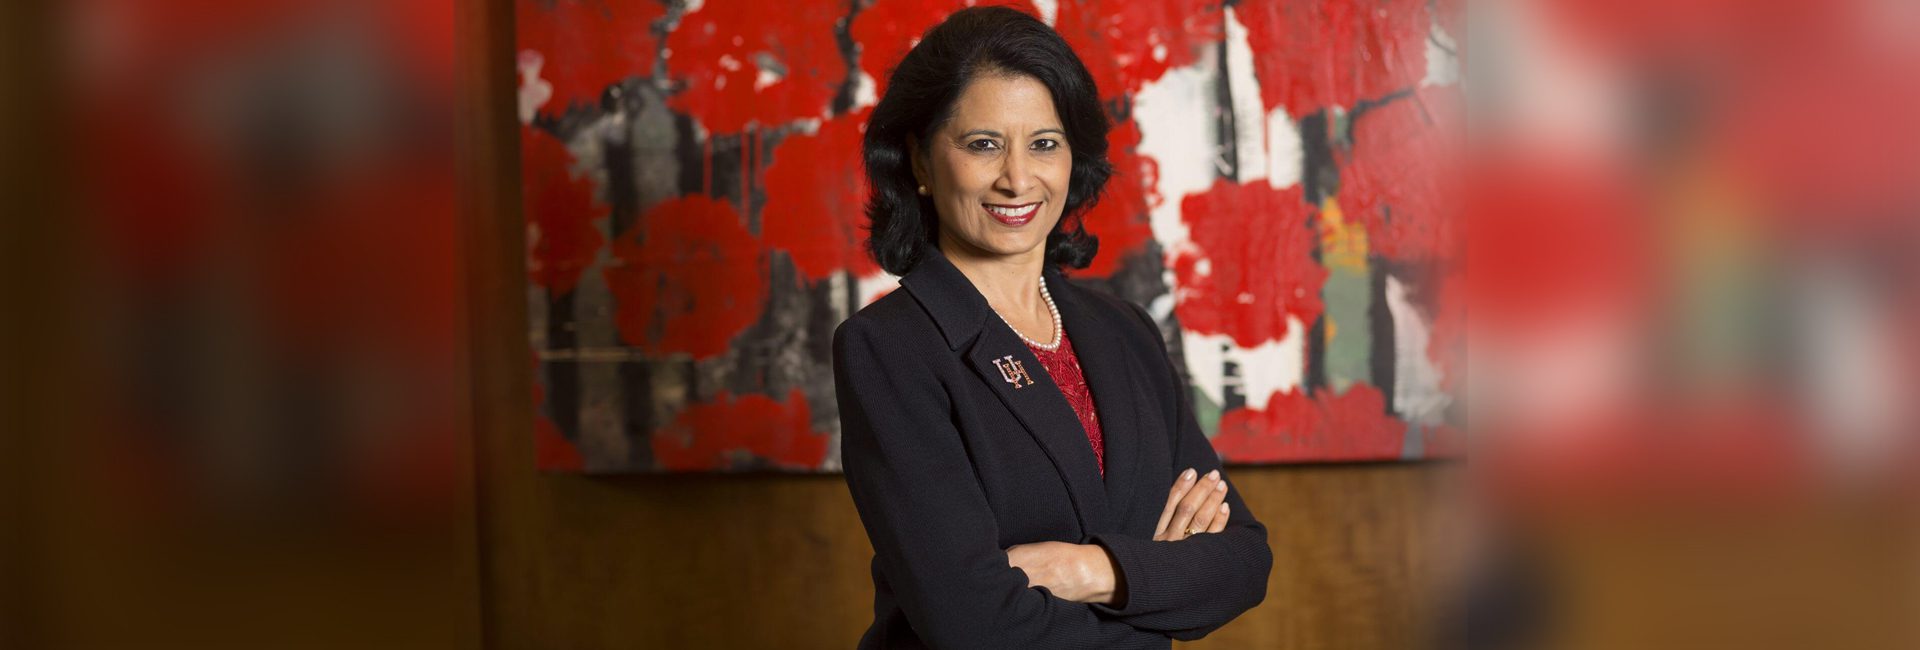 From Lucknow to Houston: Dr. Renu Khator’s journey is an inspiration